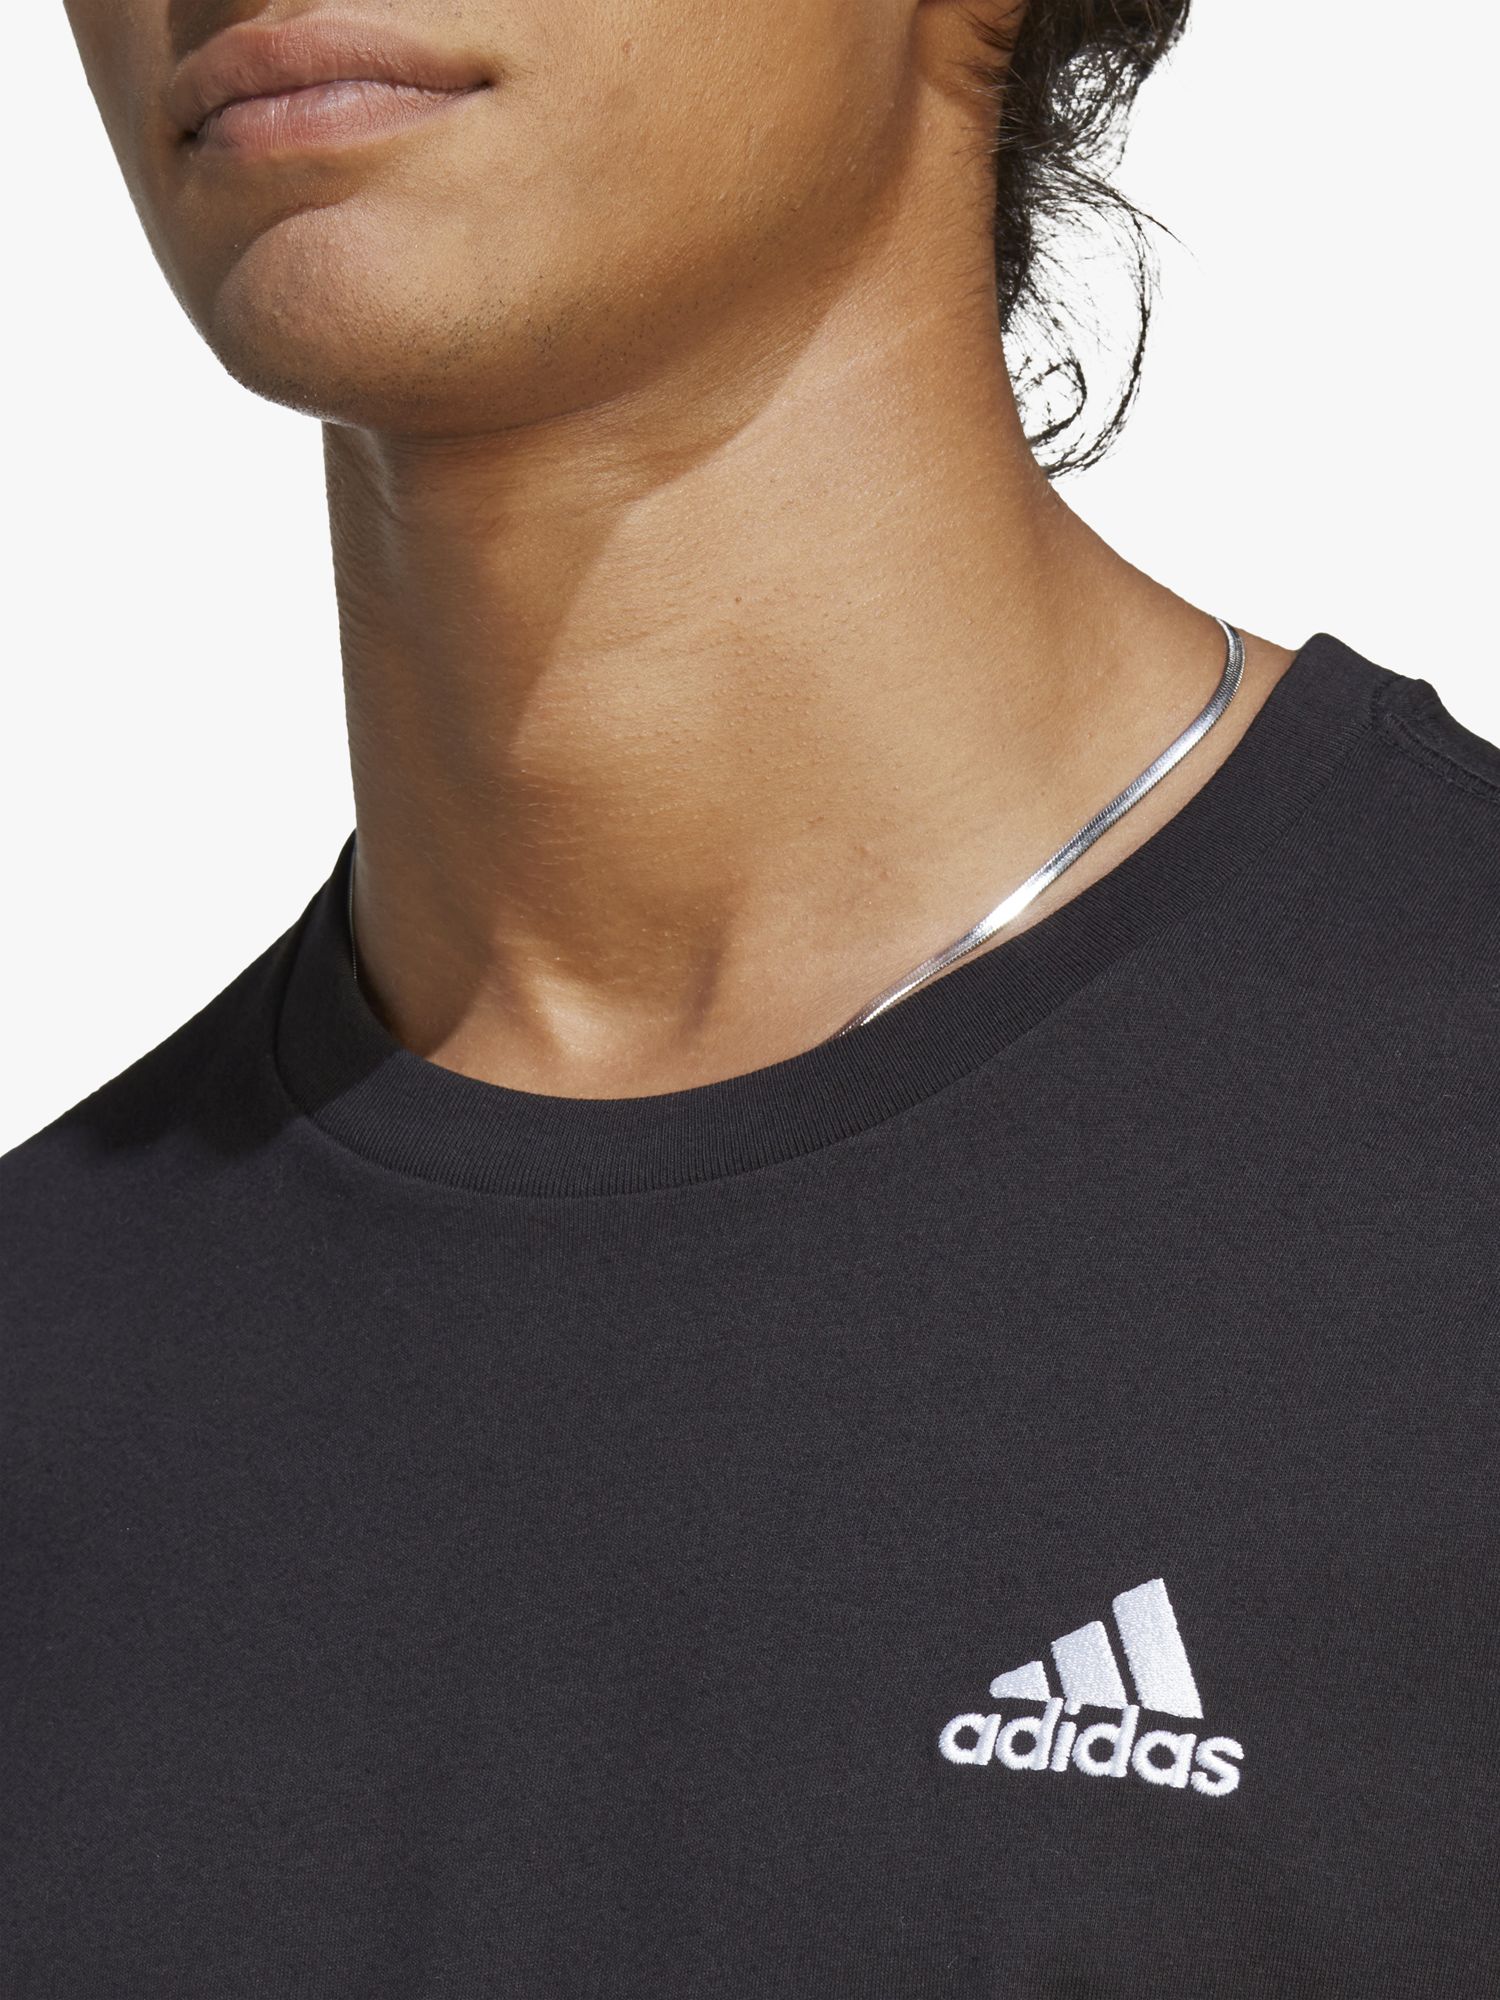 adidas Essentials Embroidered Small Logo Top, Black, S